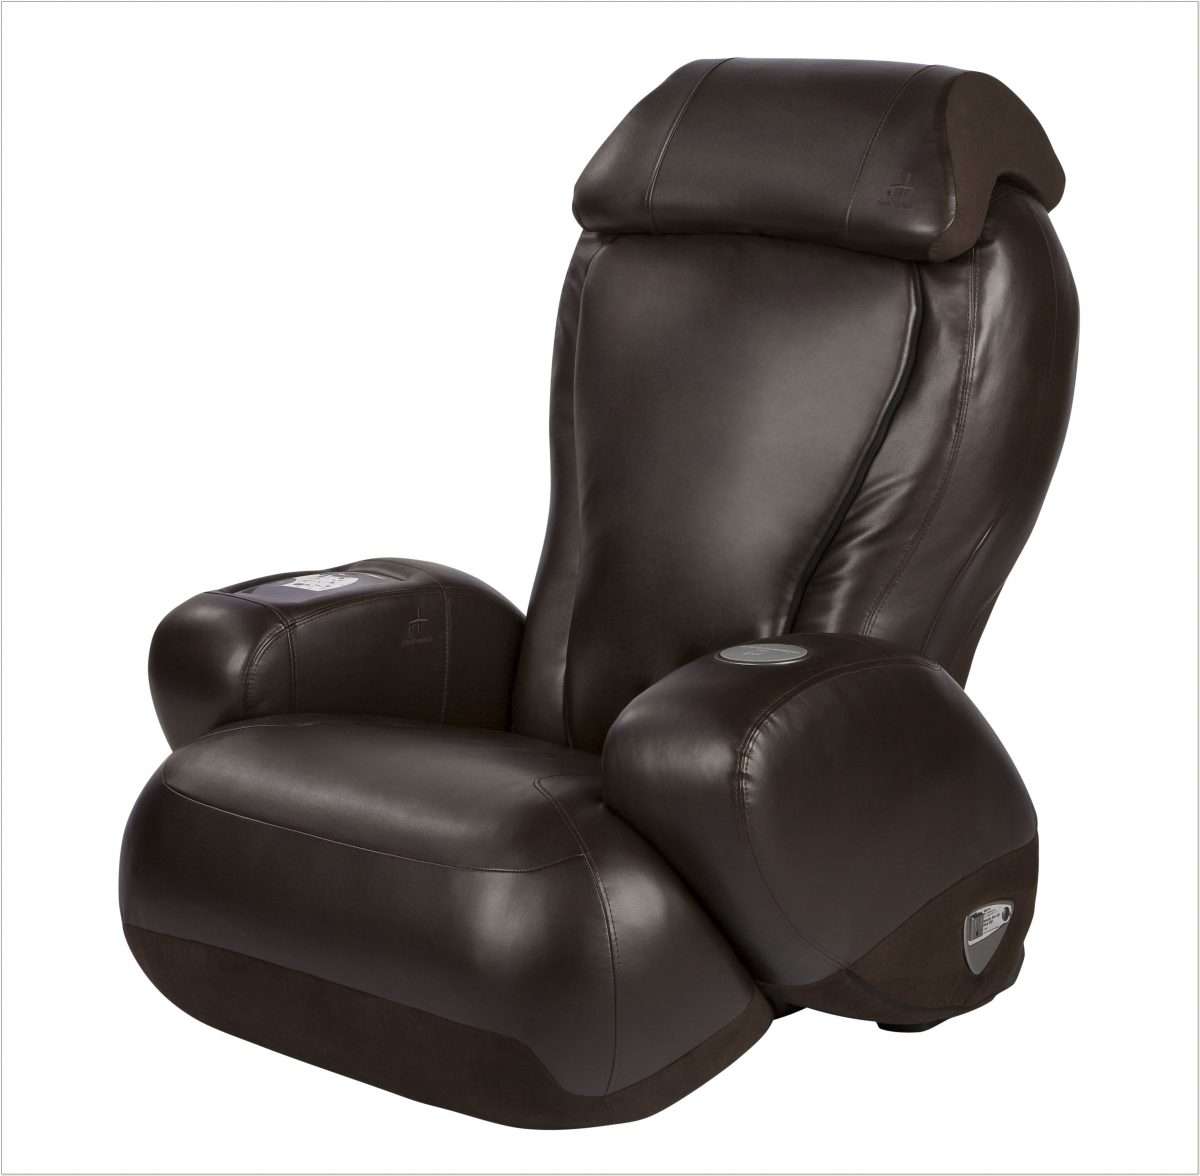 Human Touch Ijoy Robotic Massage Chair Espresso